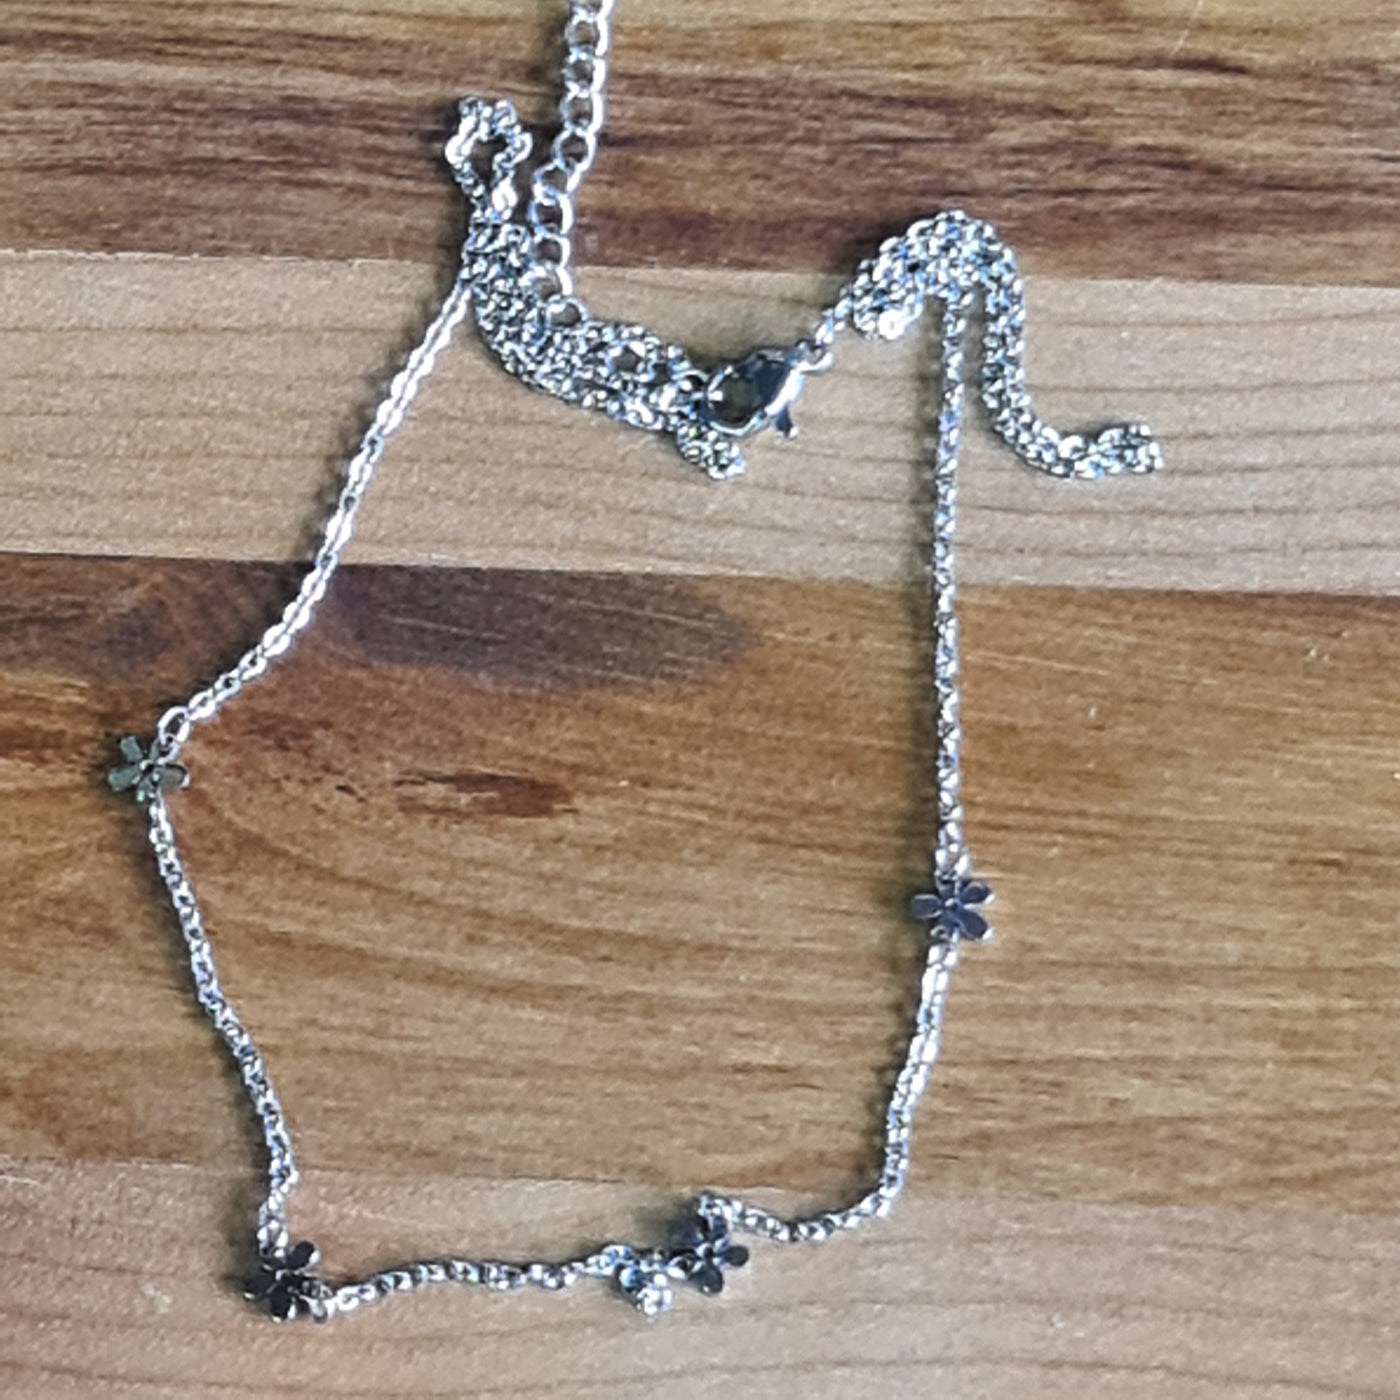 SOME Necklace Stainless Steal Daisy Chain